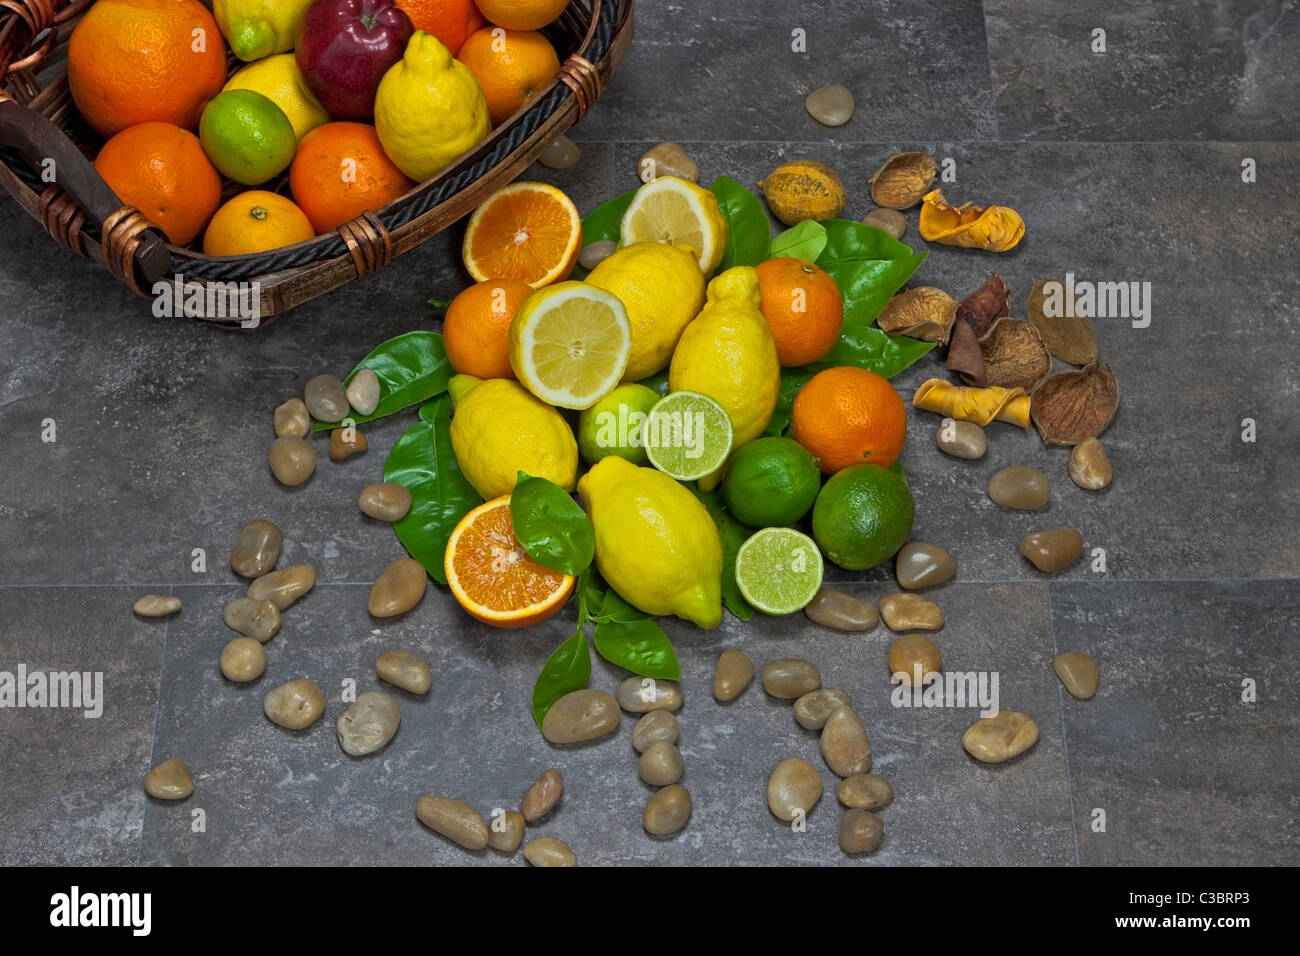 assortment with citrus fruits in a basket Stock Photo